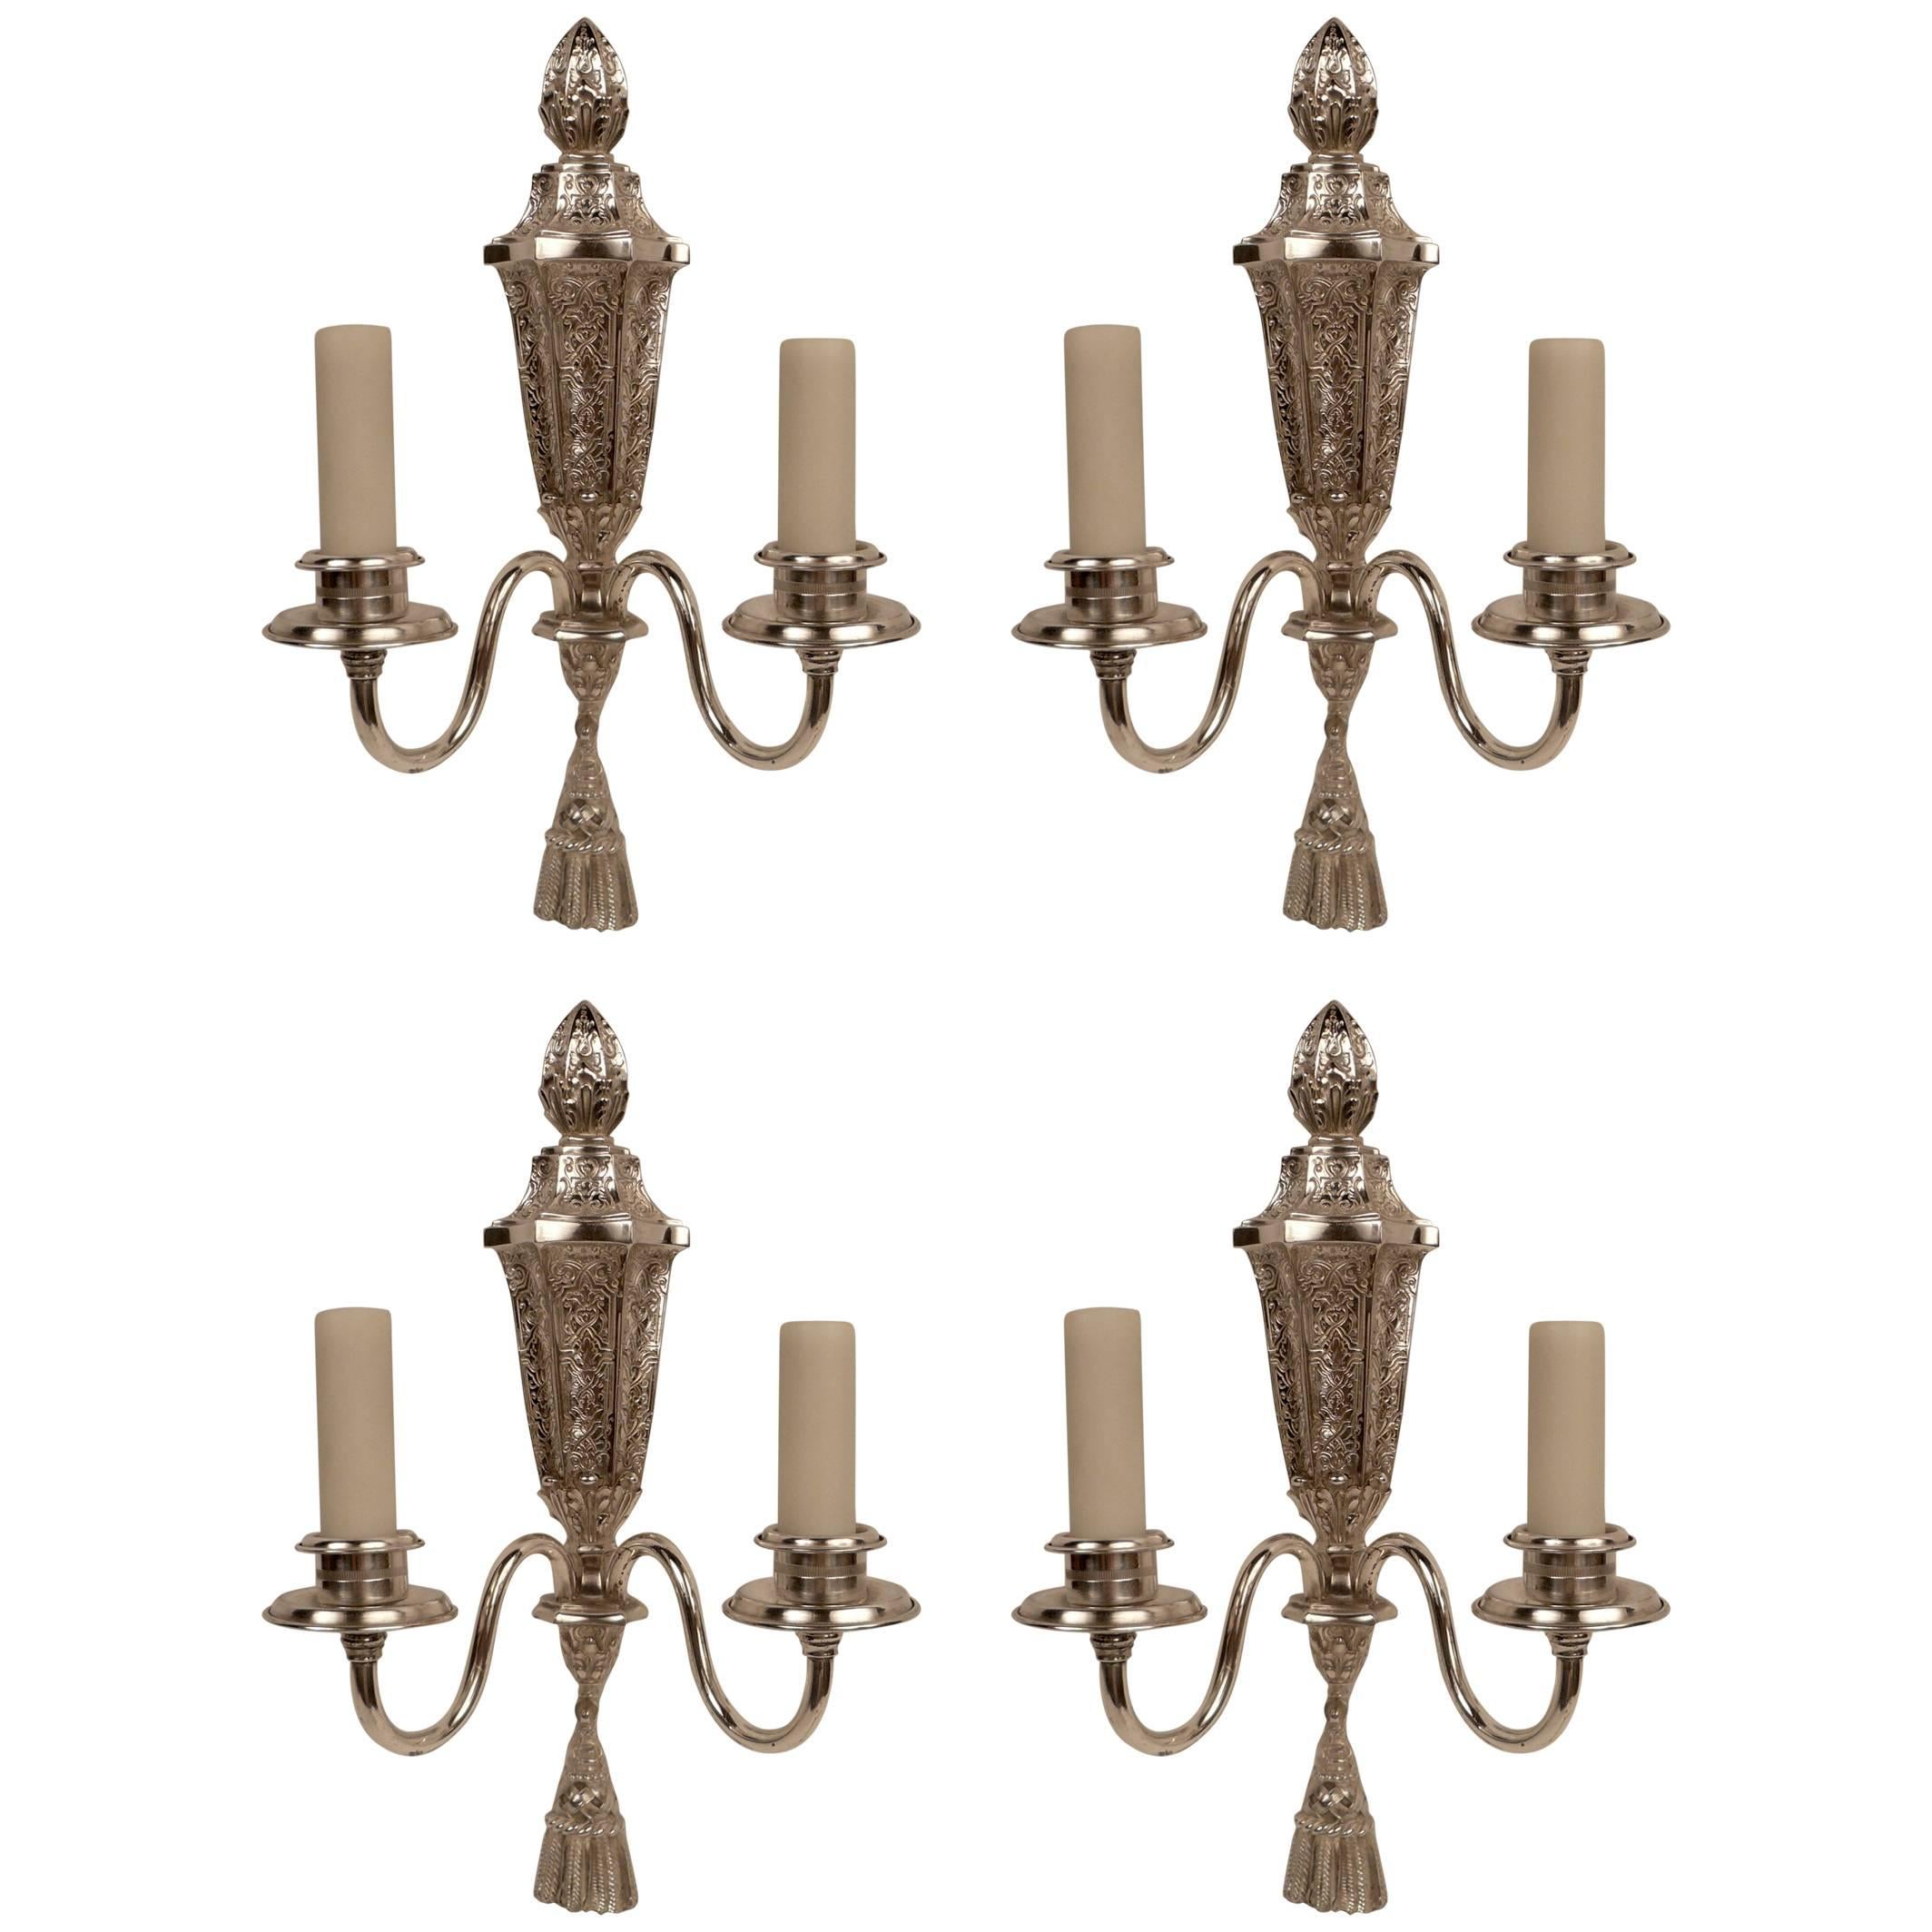 Six Signed E. F. Caldwell Early Georgian Style Silver Sconces